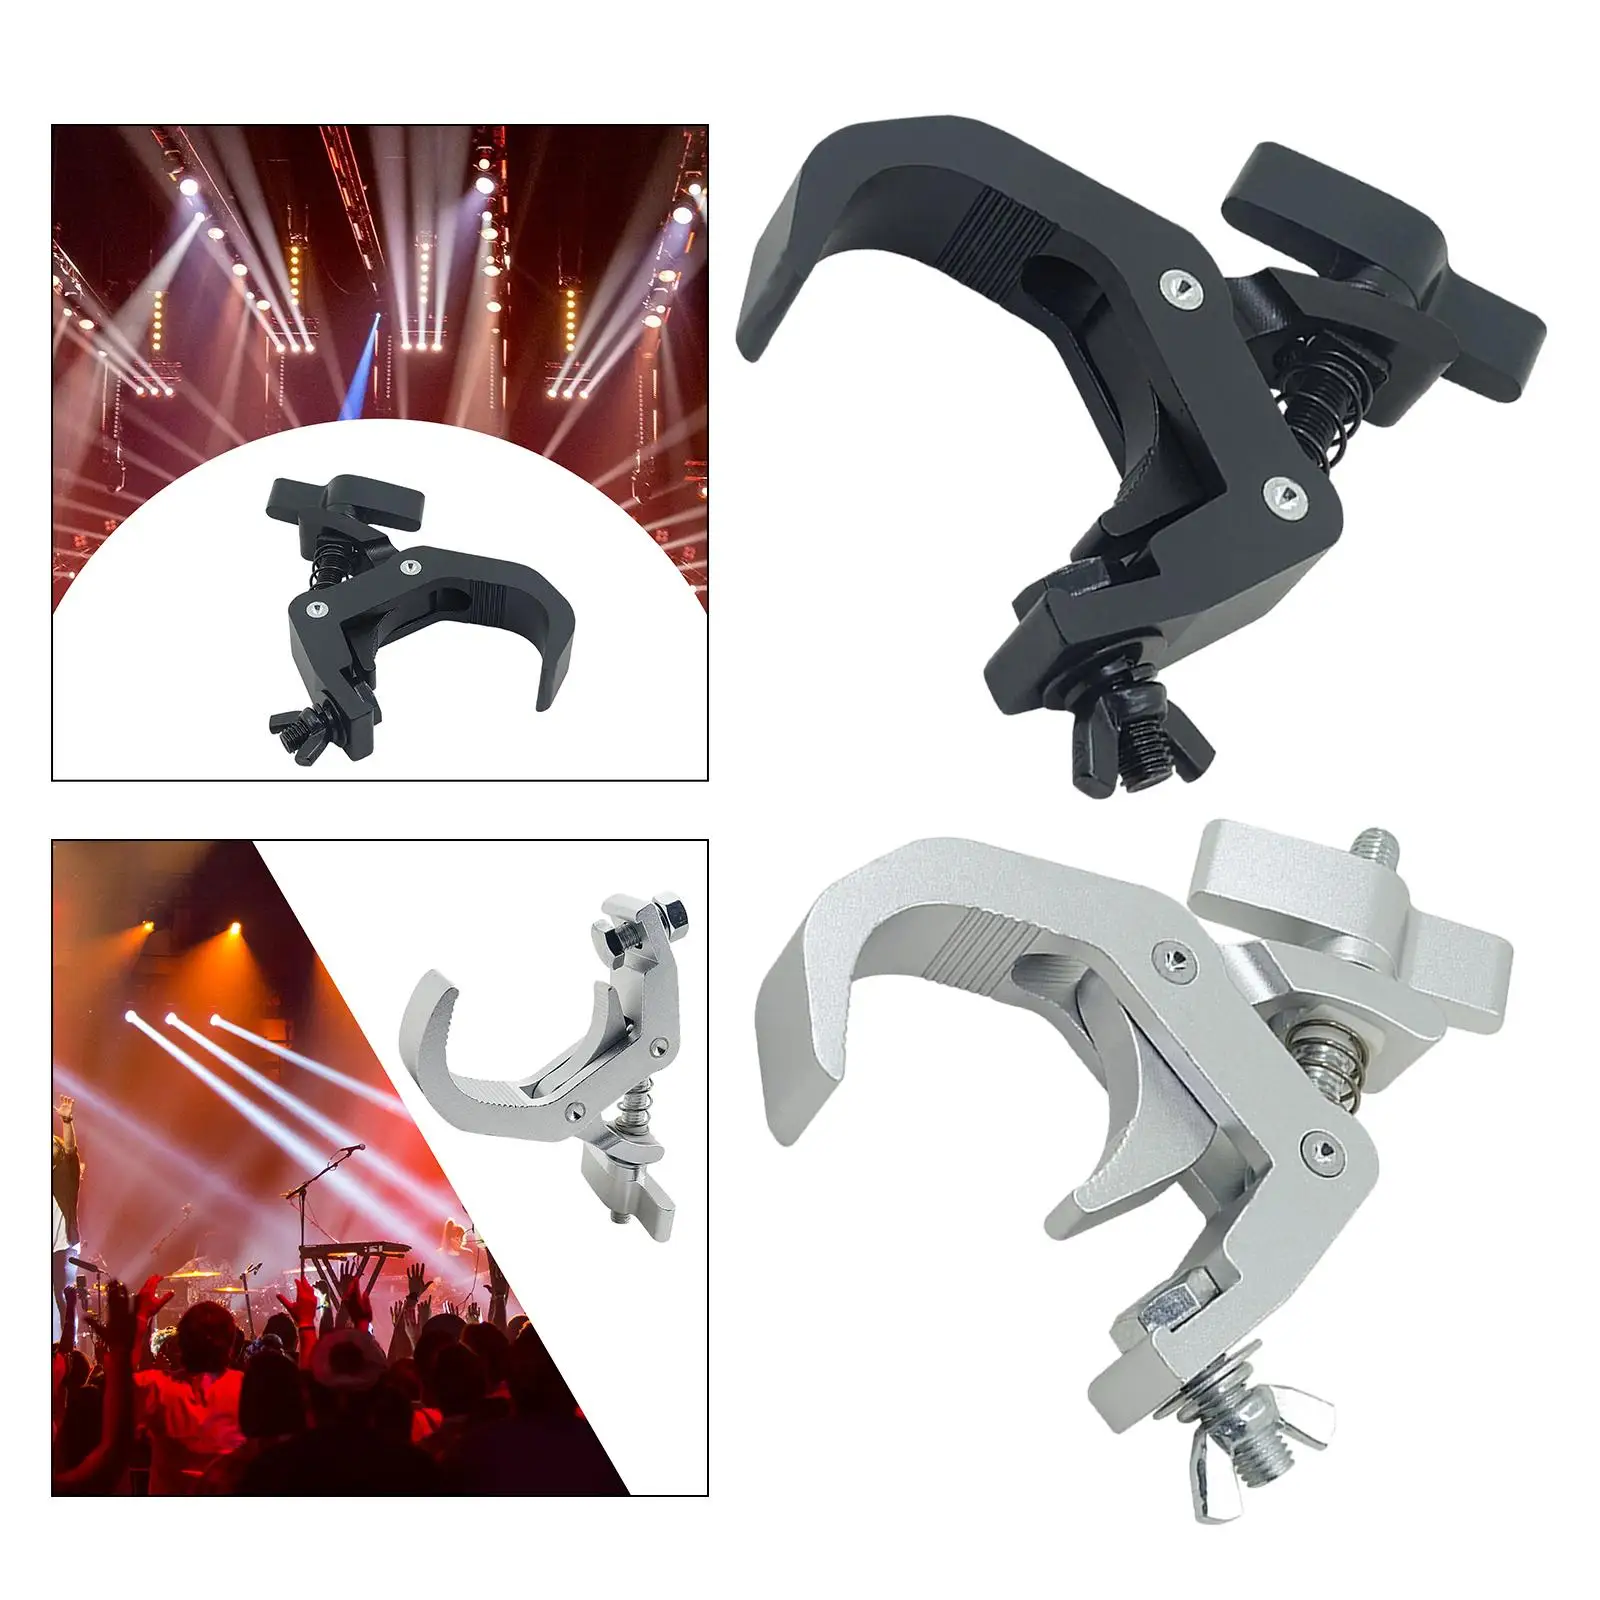 Stage Lights Clamp Easy to Install Adjustable Heavy Duty Stage Lights Clamp Hook for Club Events Spotlights Pub Exhibition